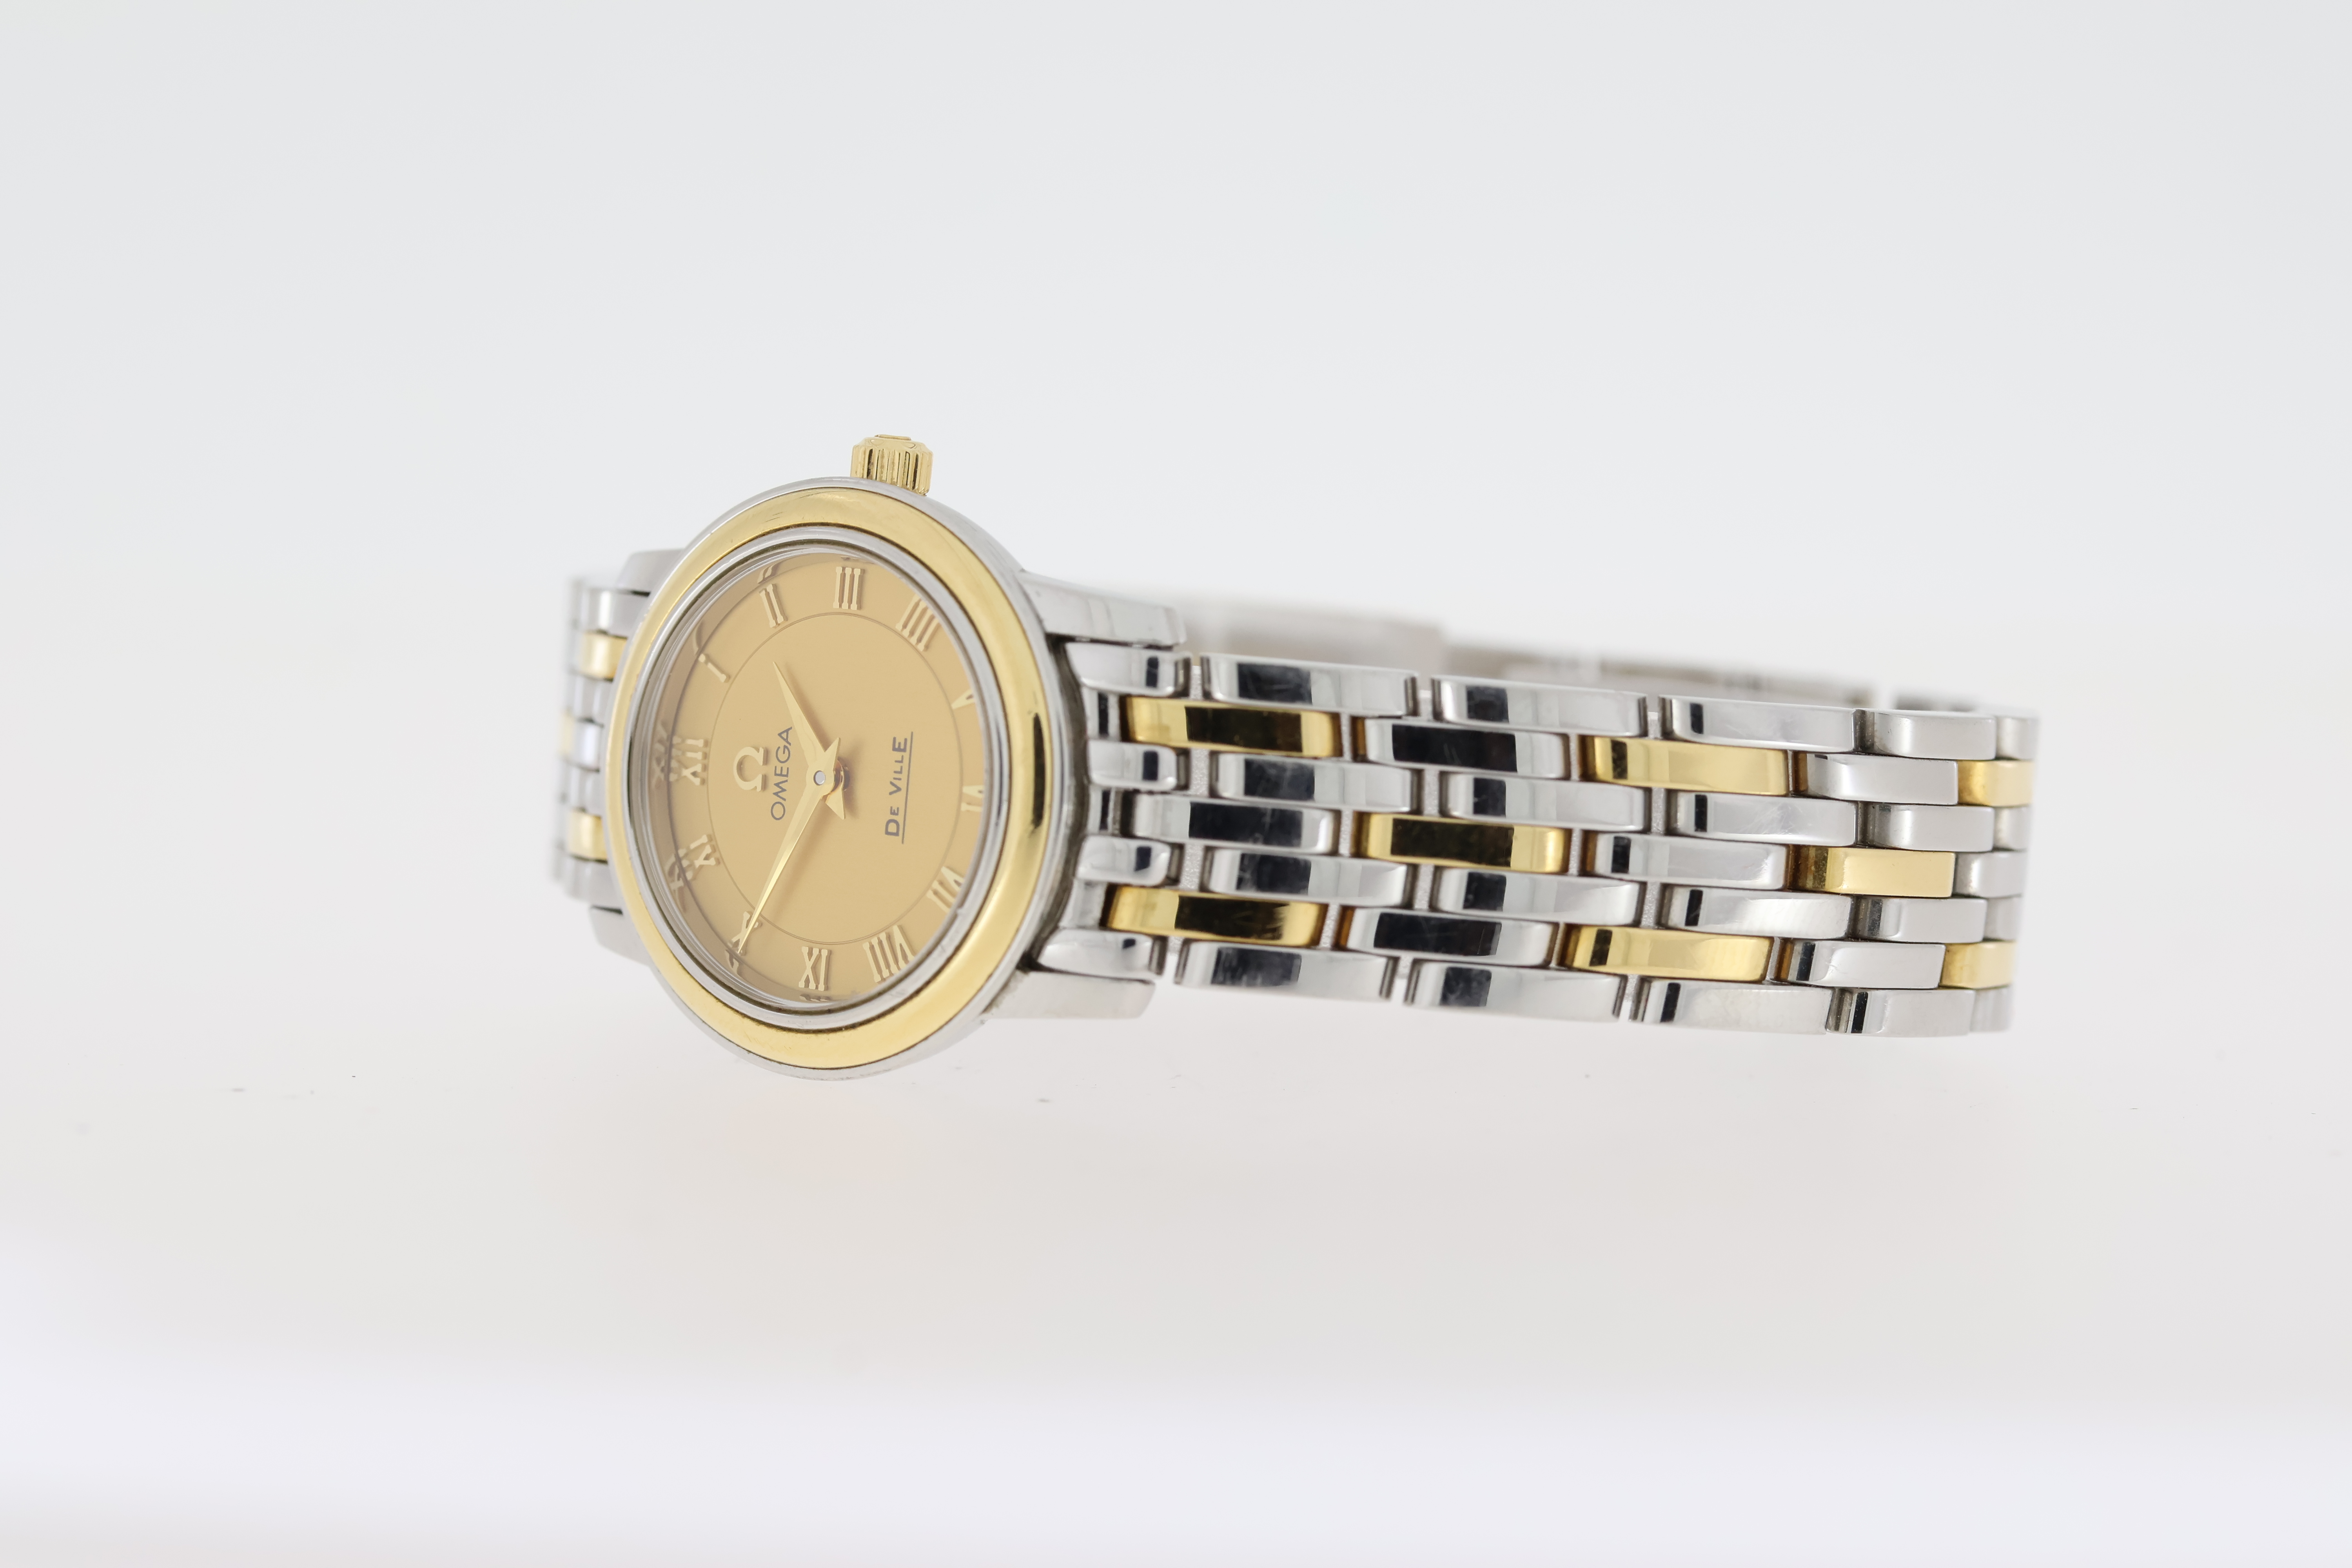 LADIES OMEGA DE VILLE PRESTIGE REFERENCE 43701200 CIRCA 2011 WITH BOX AND PAPERS - Image 7 of 9